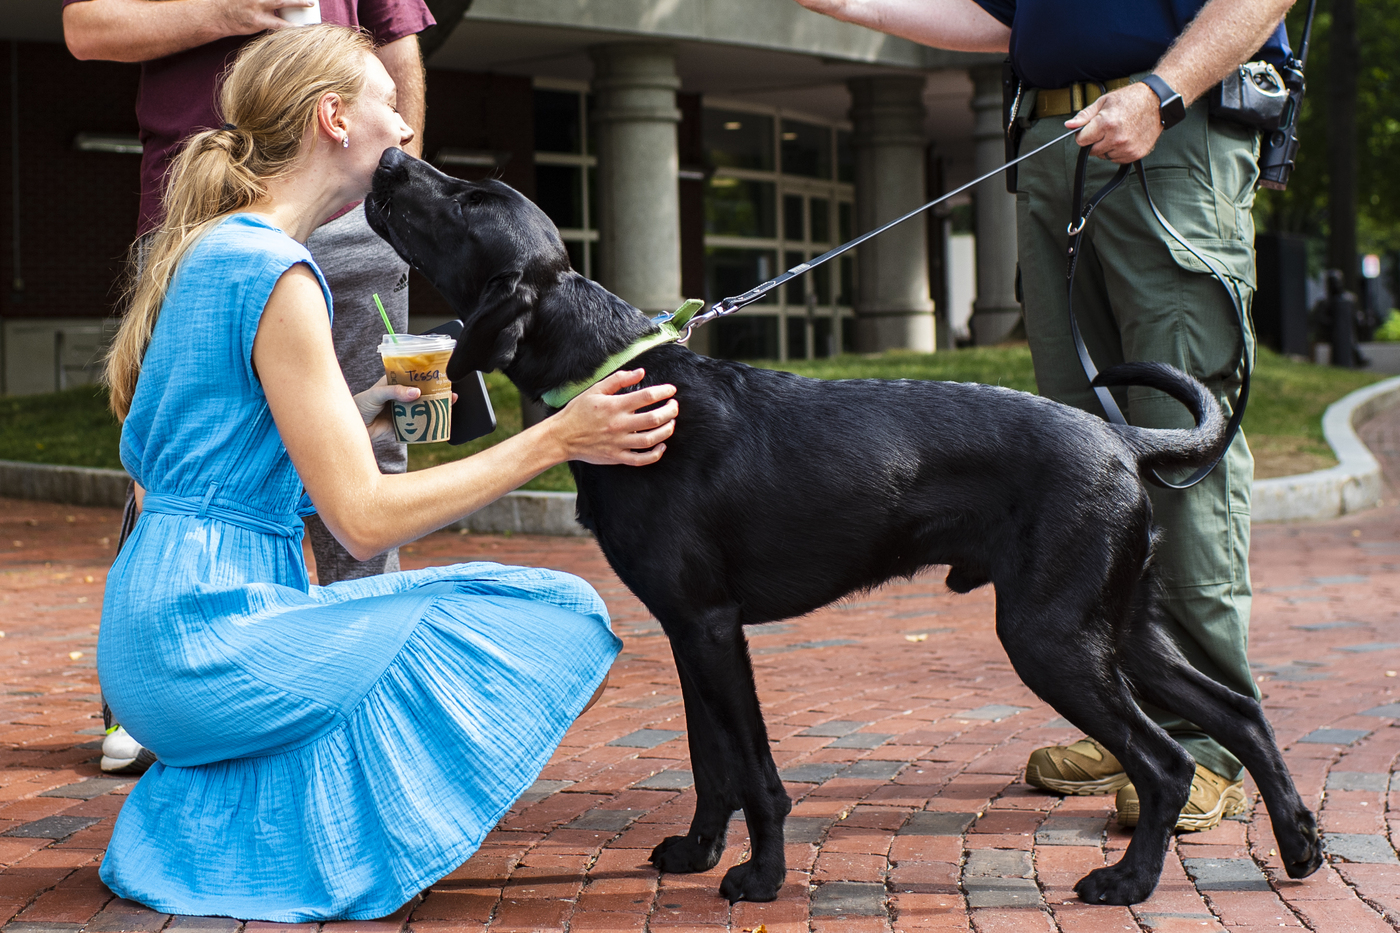 07/28/22- Boston, MA - Sarge, a 1-year old black lab and the newest member of Northeastern's pack, greets physicians assistant student Tessa Lilley in Centennial Common while on a walk with NUPD Officer Sgt. Joe Corbett on Thursday, July 28, 2022. Photo by Alyssa Stone/Northeastern University